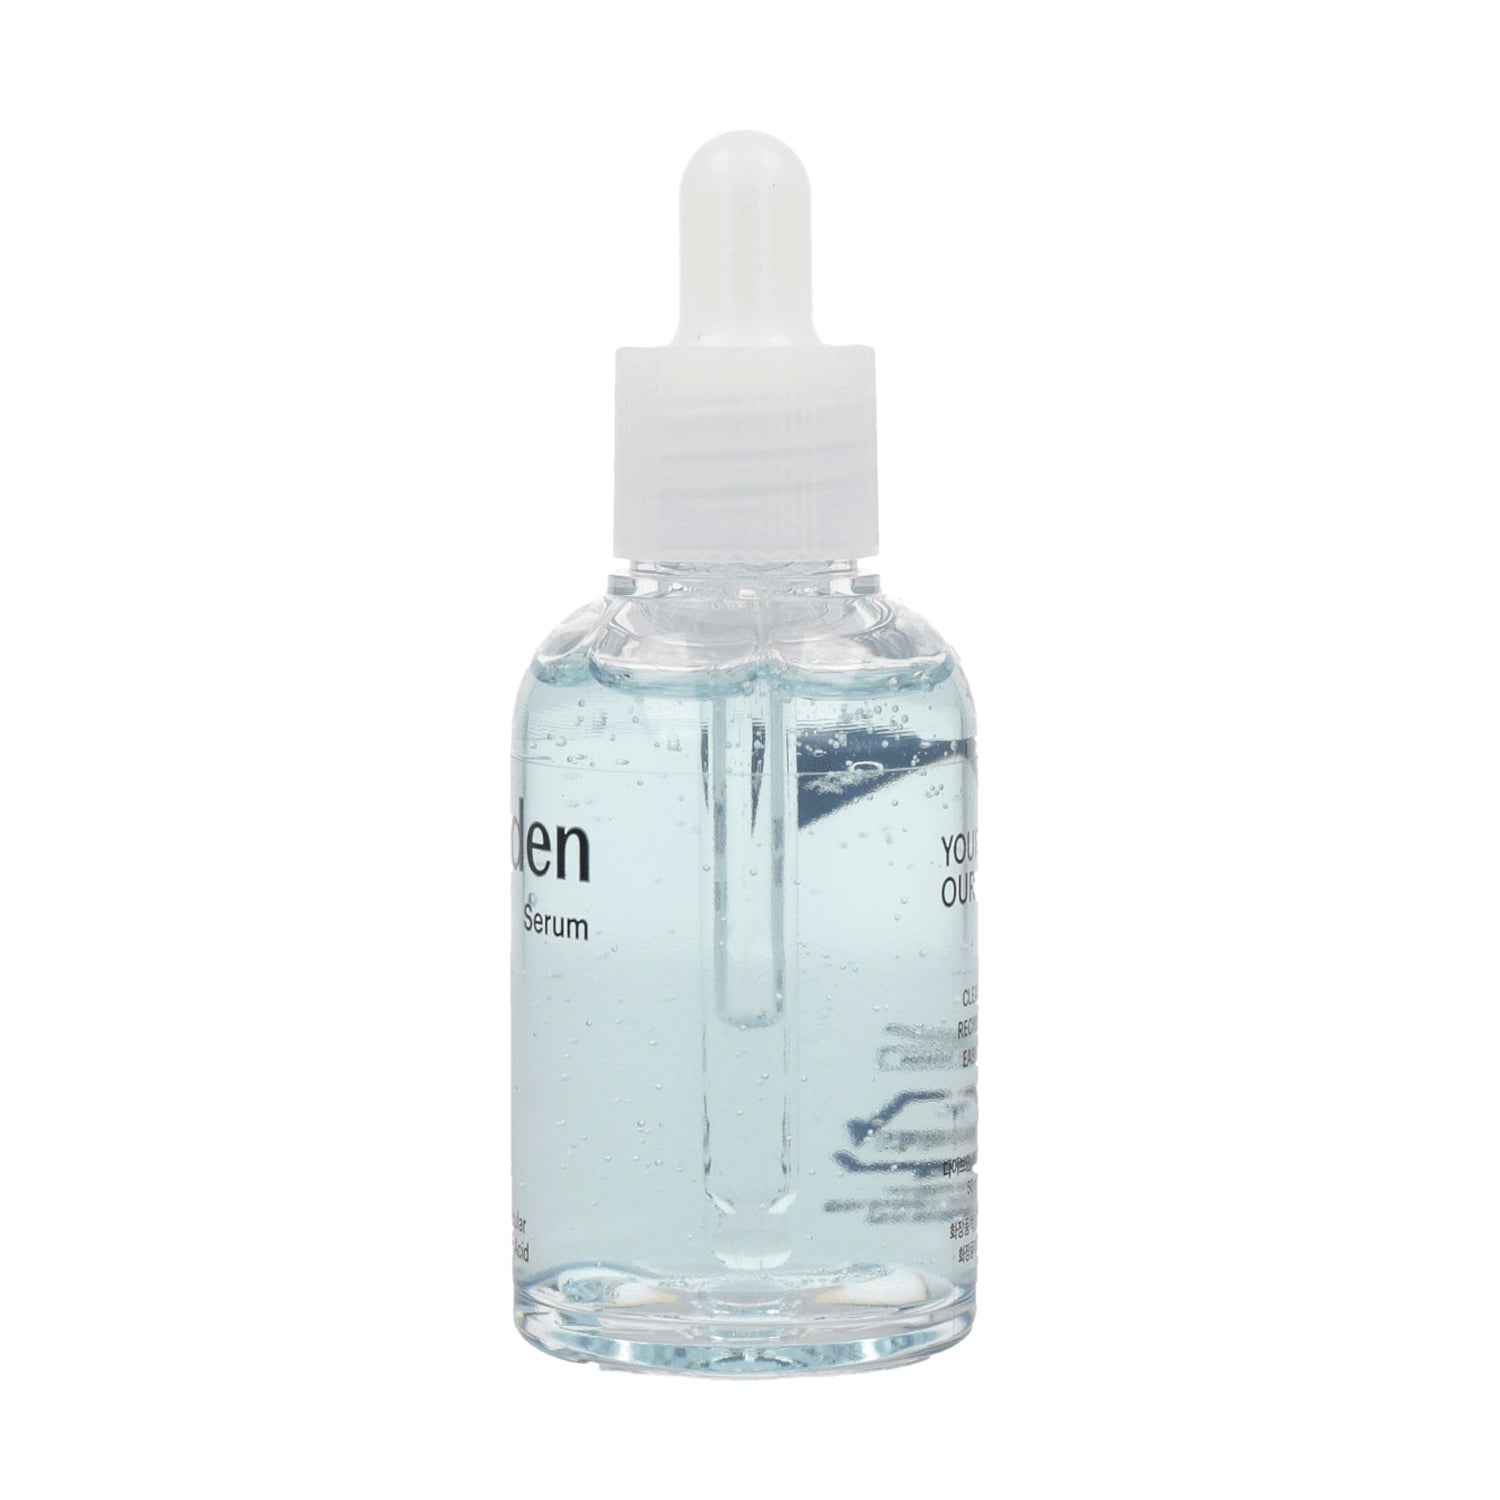 Torriden *renew* Dive-In Low Molecule Hyaluronic Acid Serum 50ml - Helps to strengthen and repair the skin barrier, improving overall skin resilience and health.